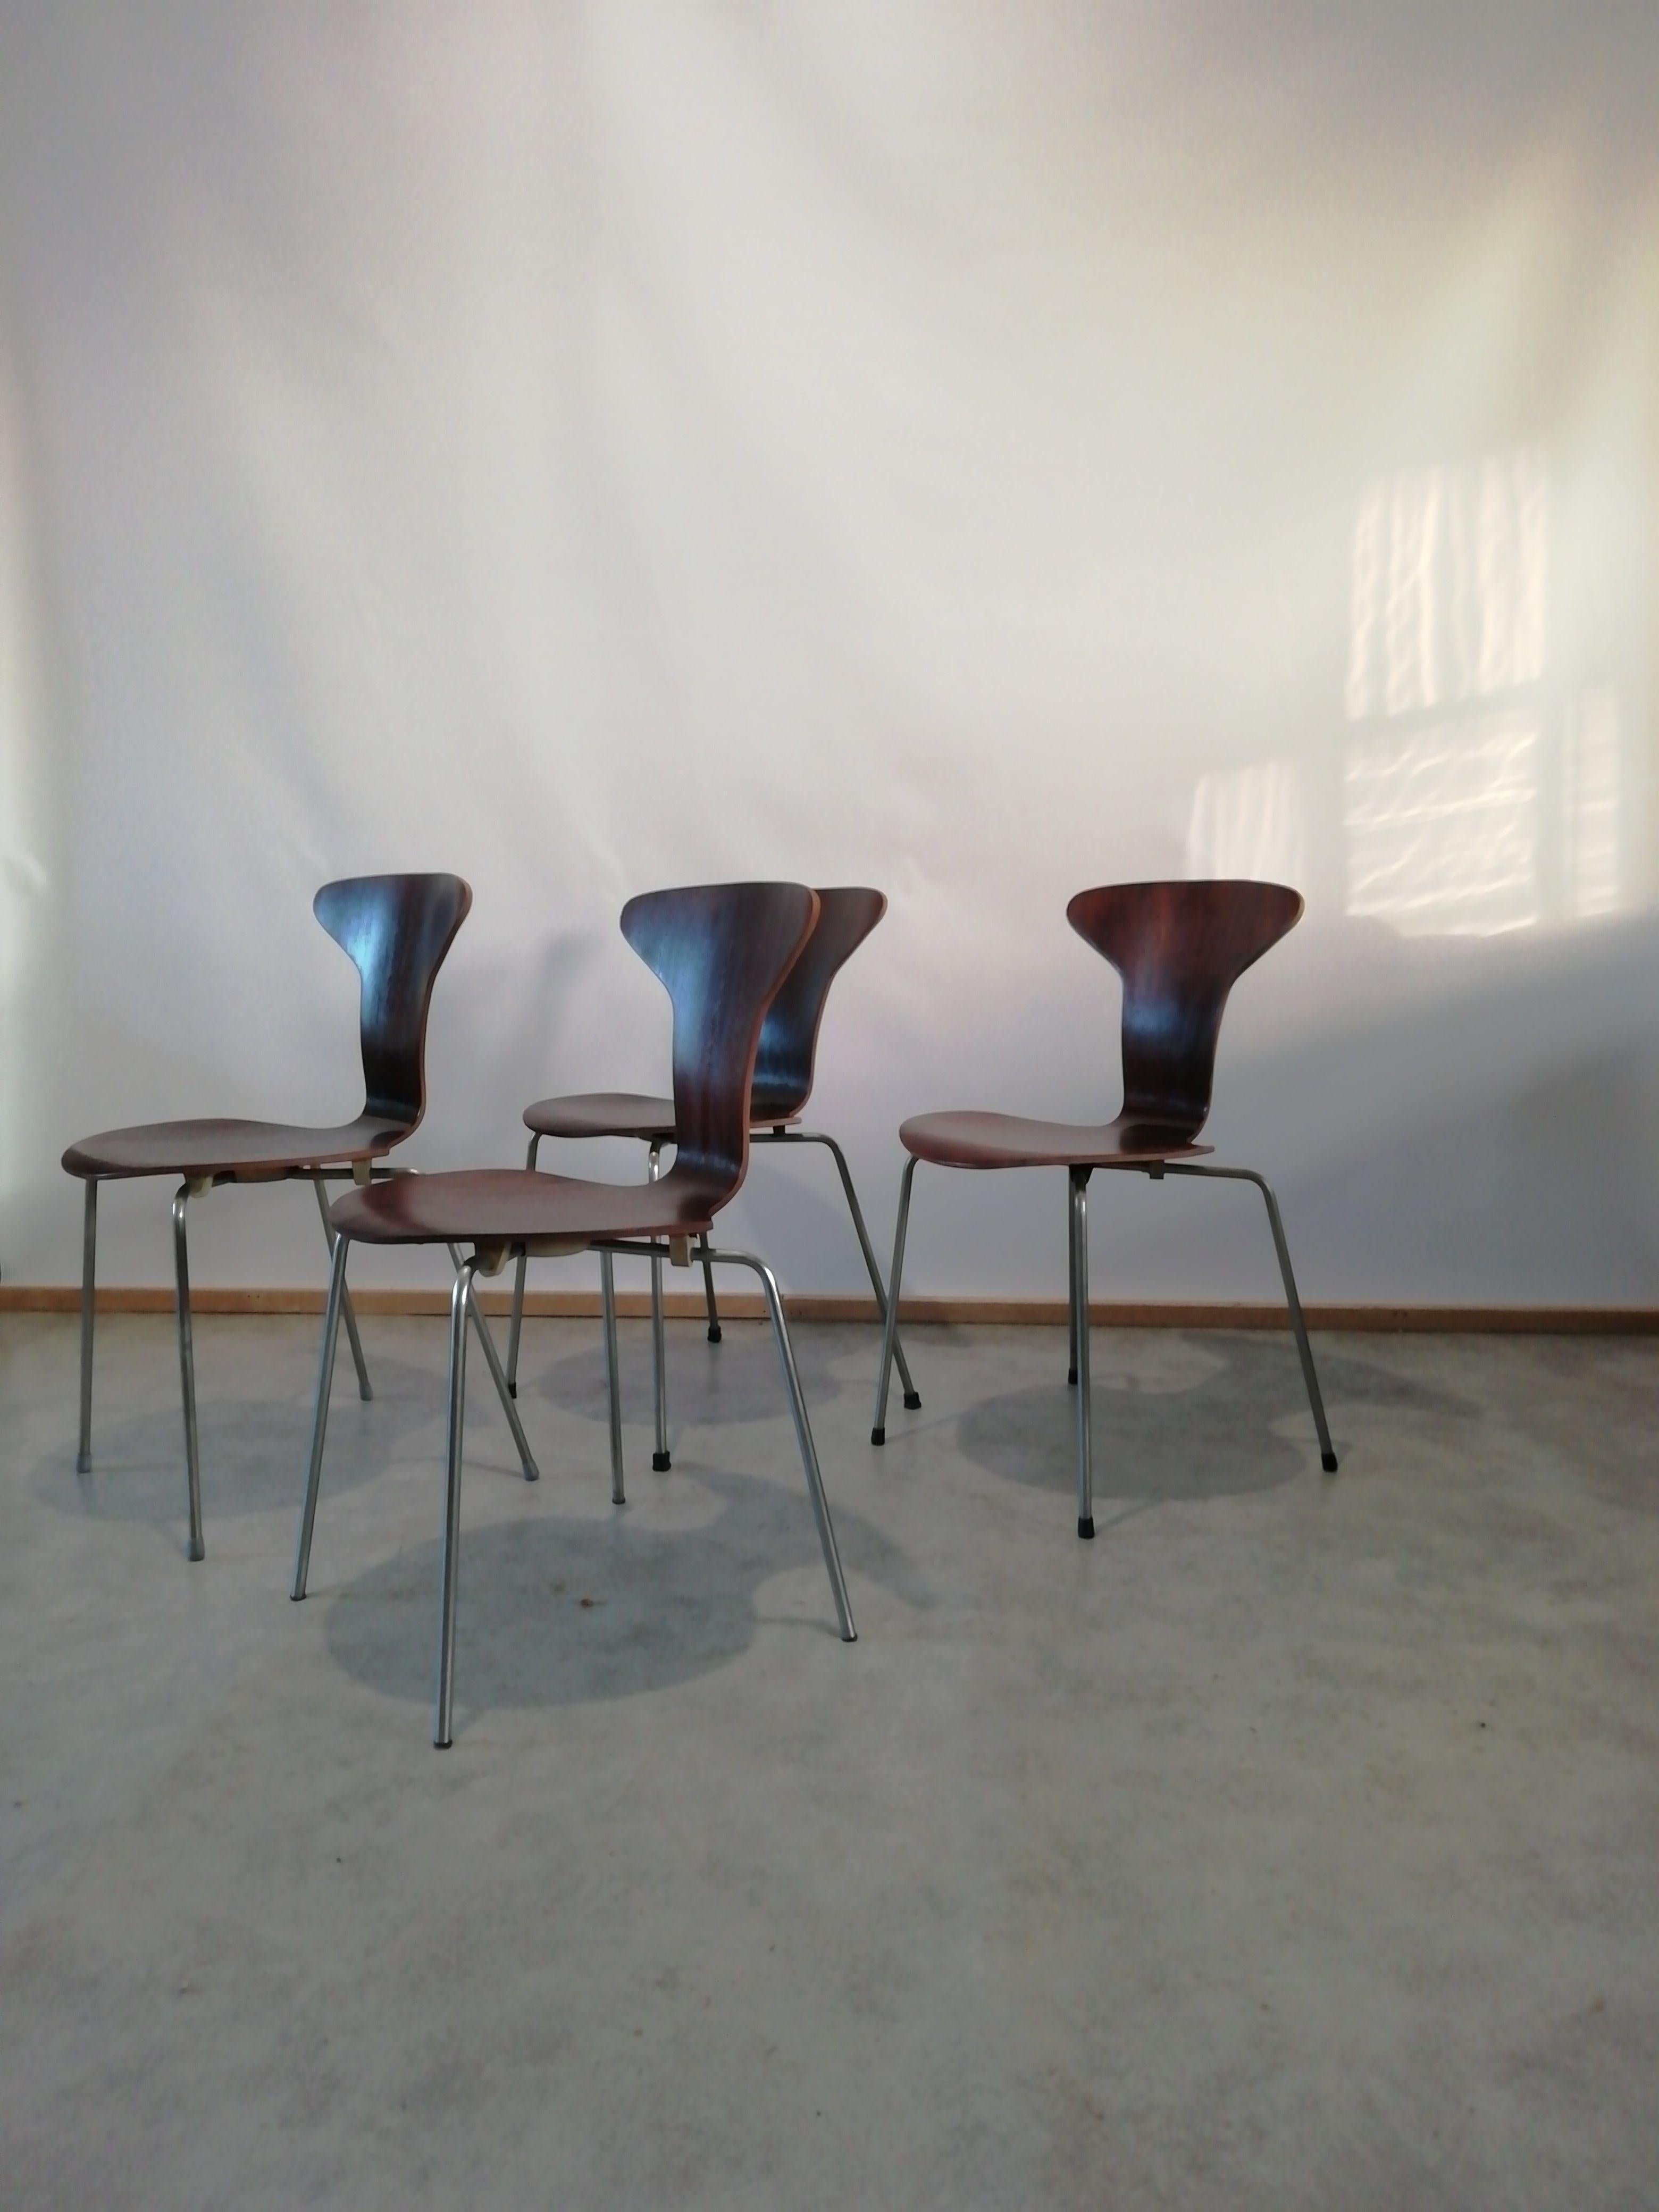 Set of 4 teak 'Mosquito' model no. 3105 chairs designed by Arne Jacobsen for Fritz Hansen, Denmark in the 1950s. Chairs are stackable and made of bent laminated plywood finished in teak veneer. Supported by sturdy chrome legs and original plastic